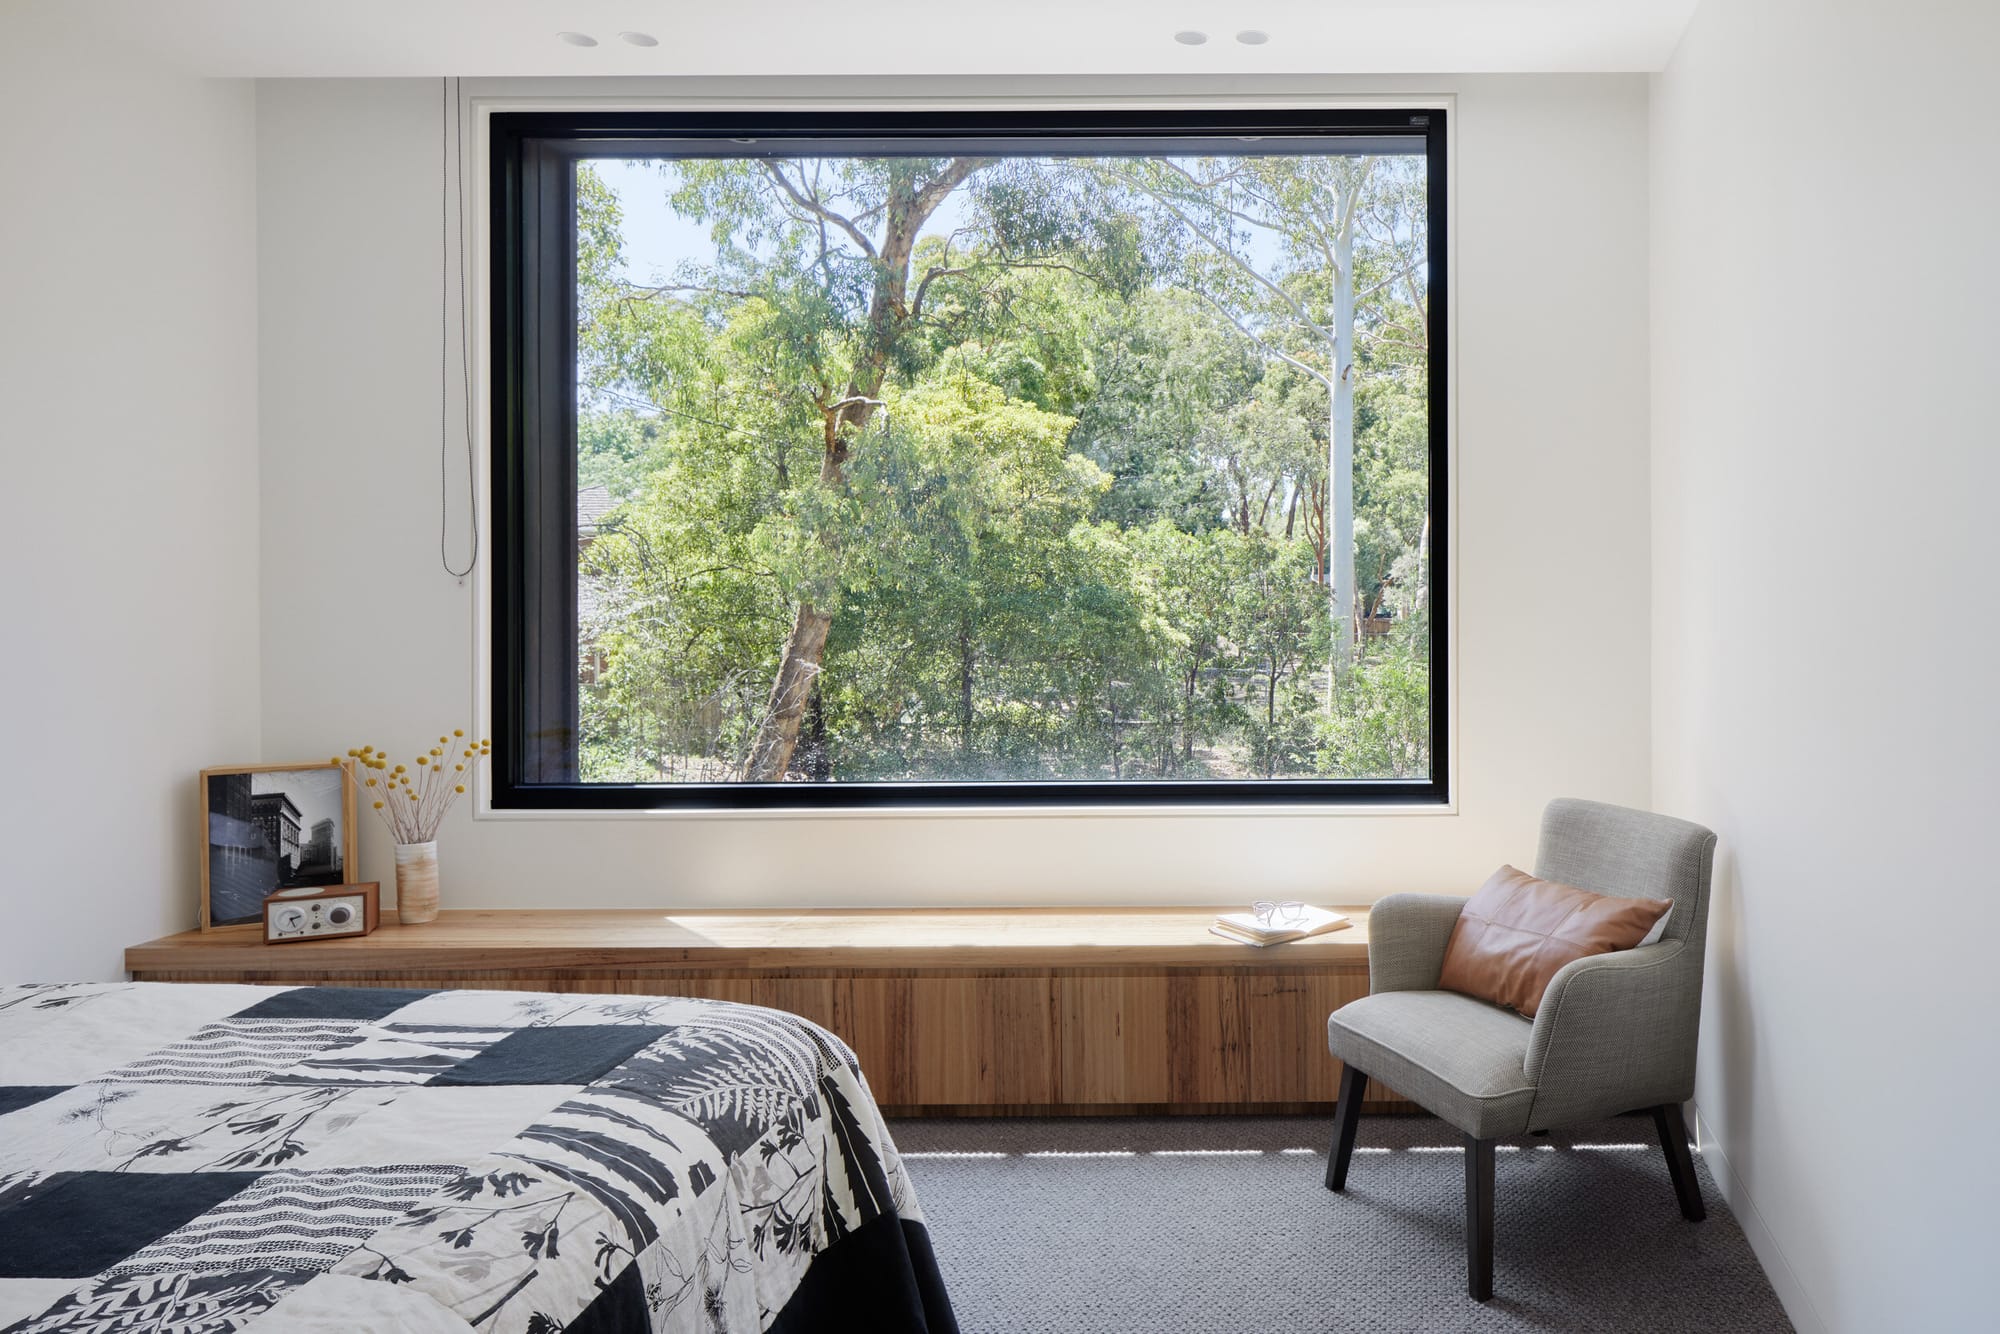 Laurel Grove by Kirsten Johnstone Architecture. Photography by Tatjana Plitt. Upstairs bedroom with built in timber bench running length of wall. Window overlooks gum trees.